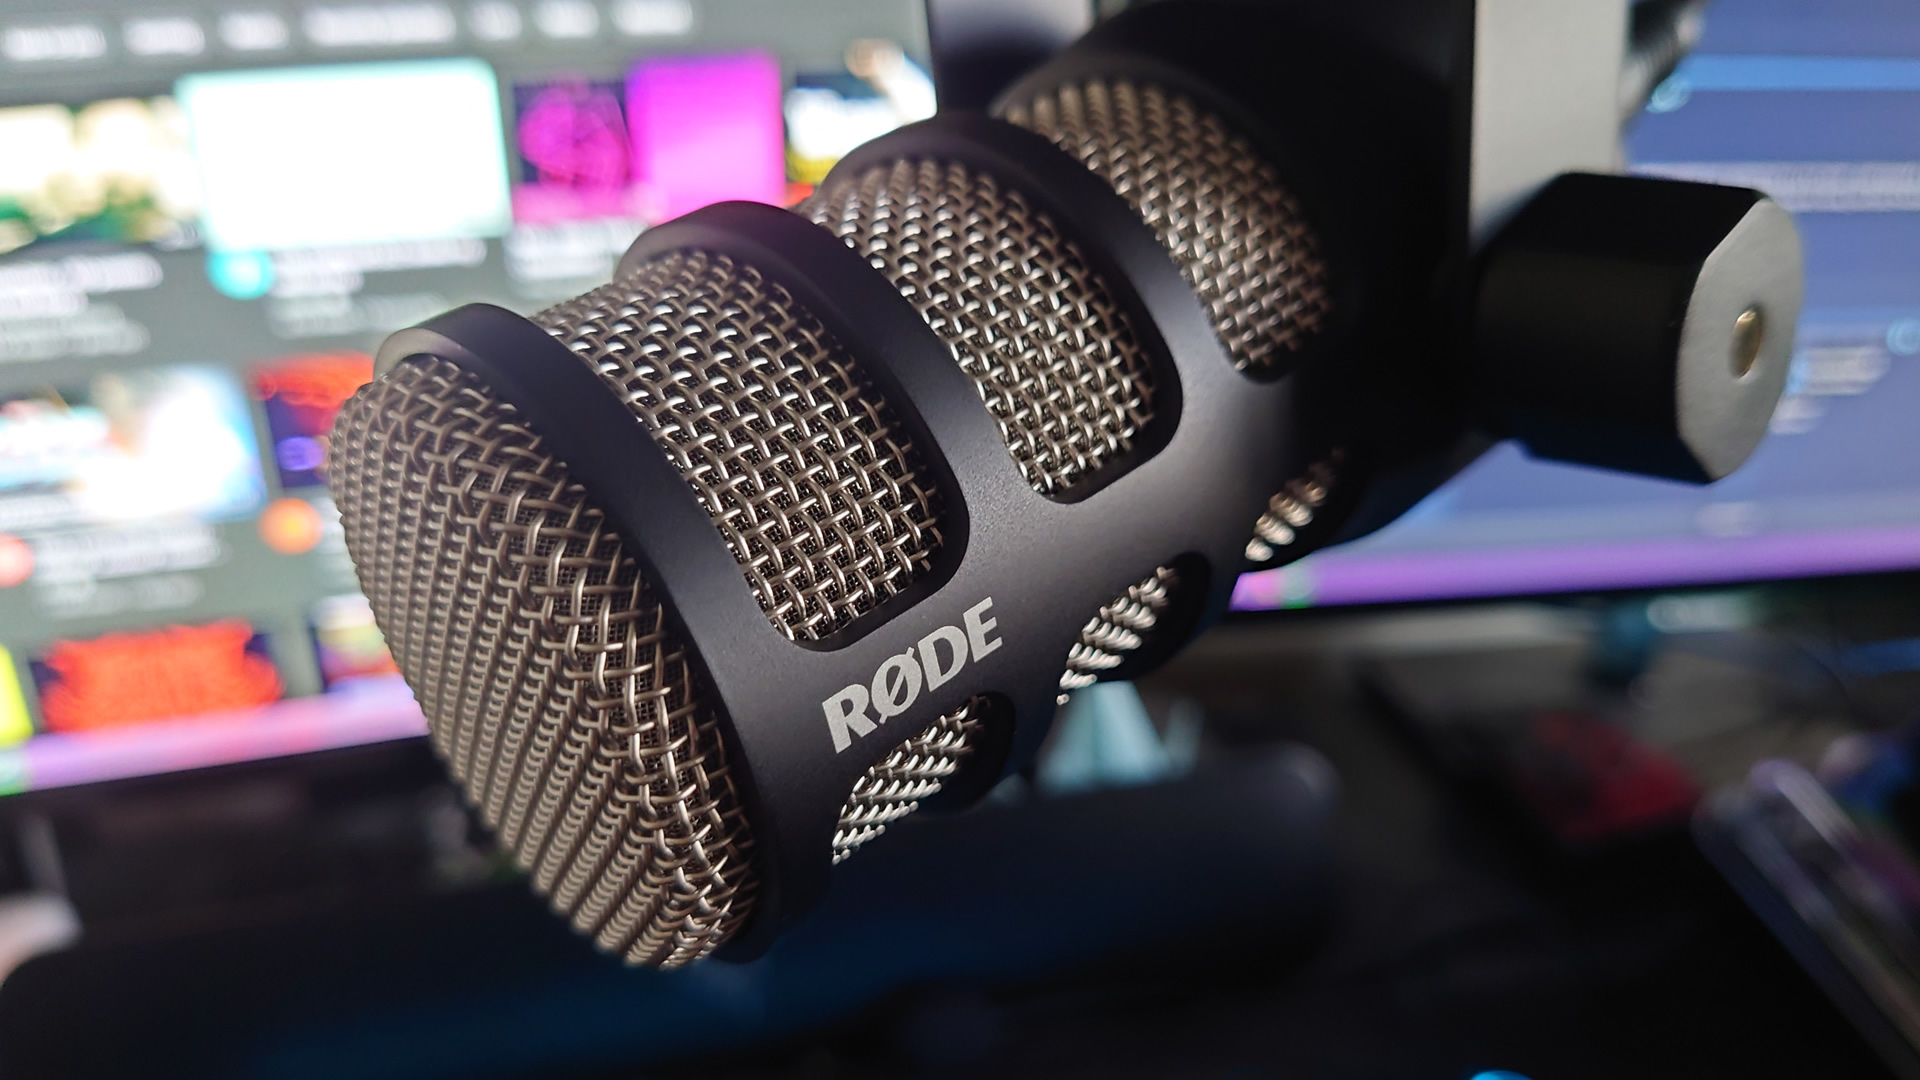 Rode PodMic review: Excellent sound quality at an aggressive price point